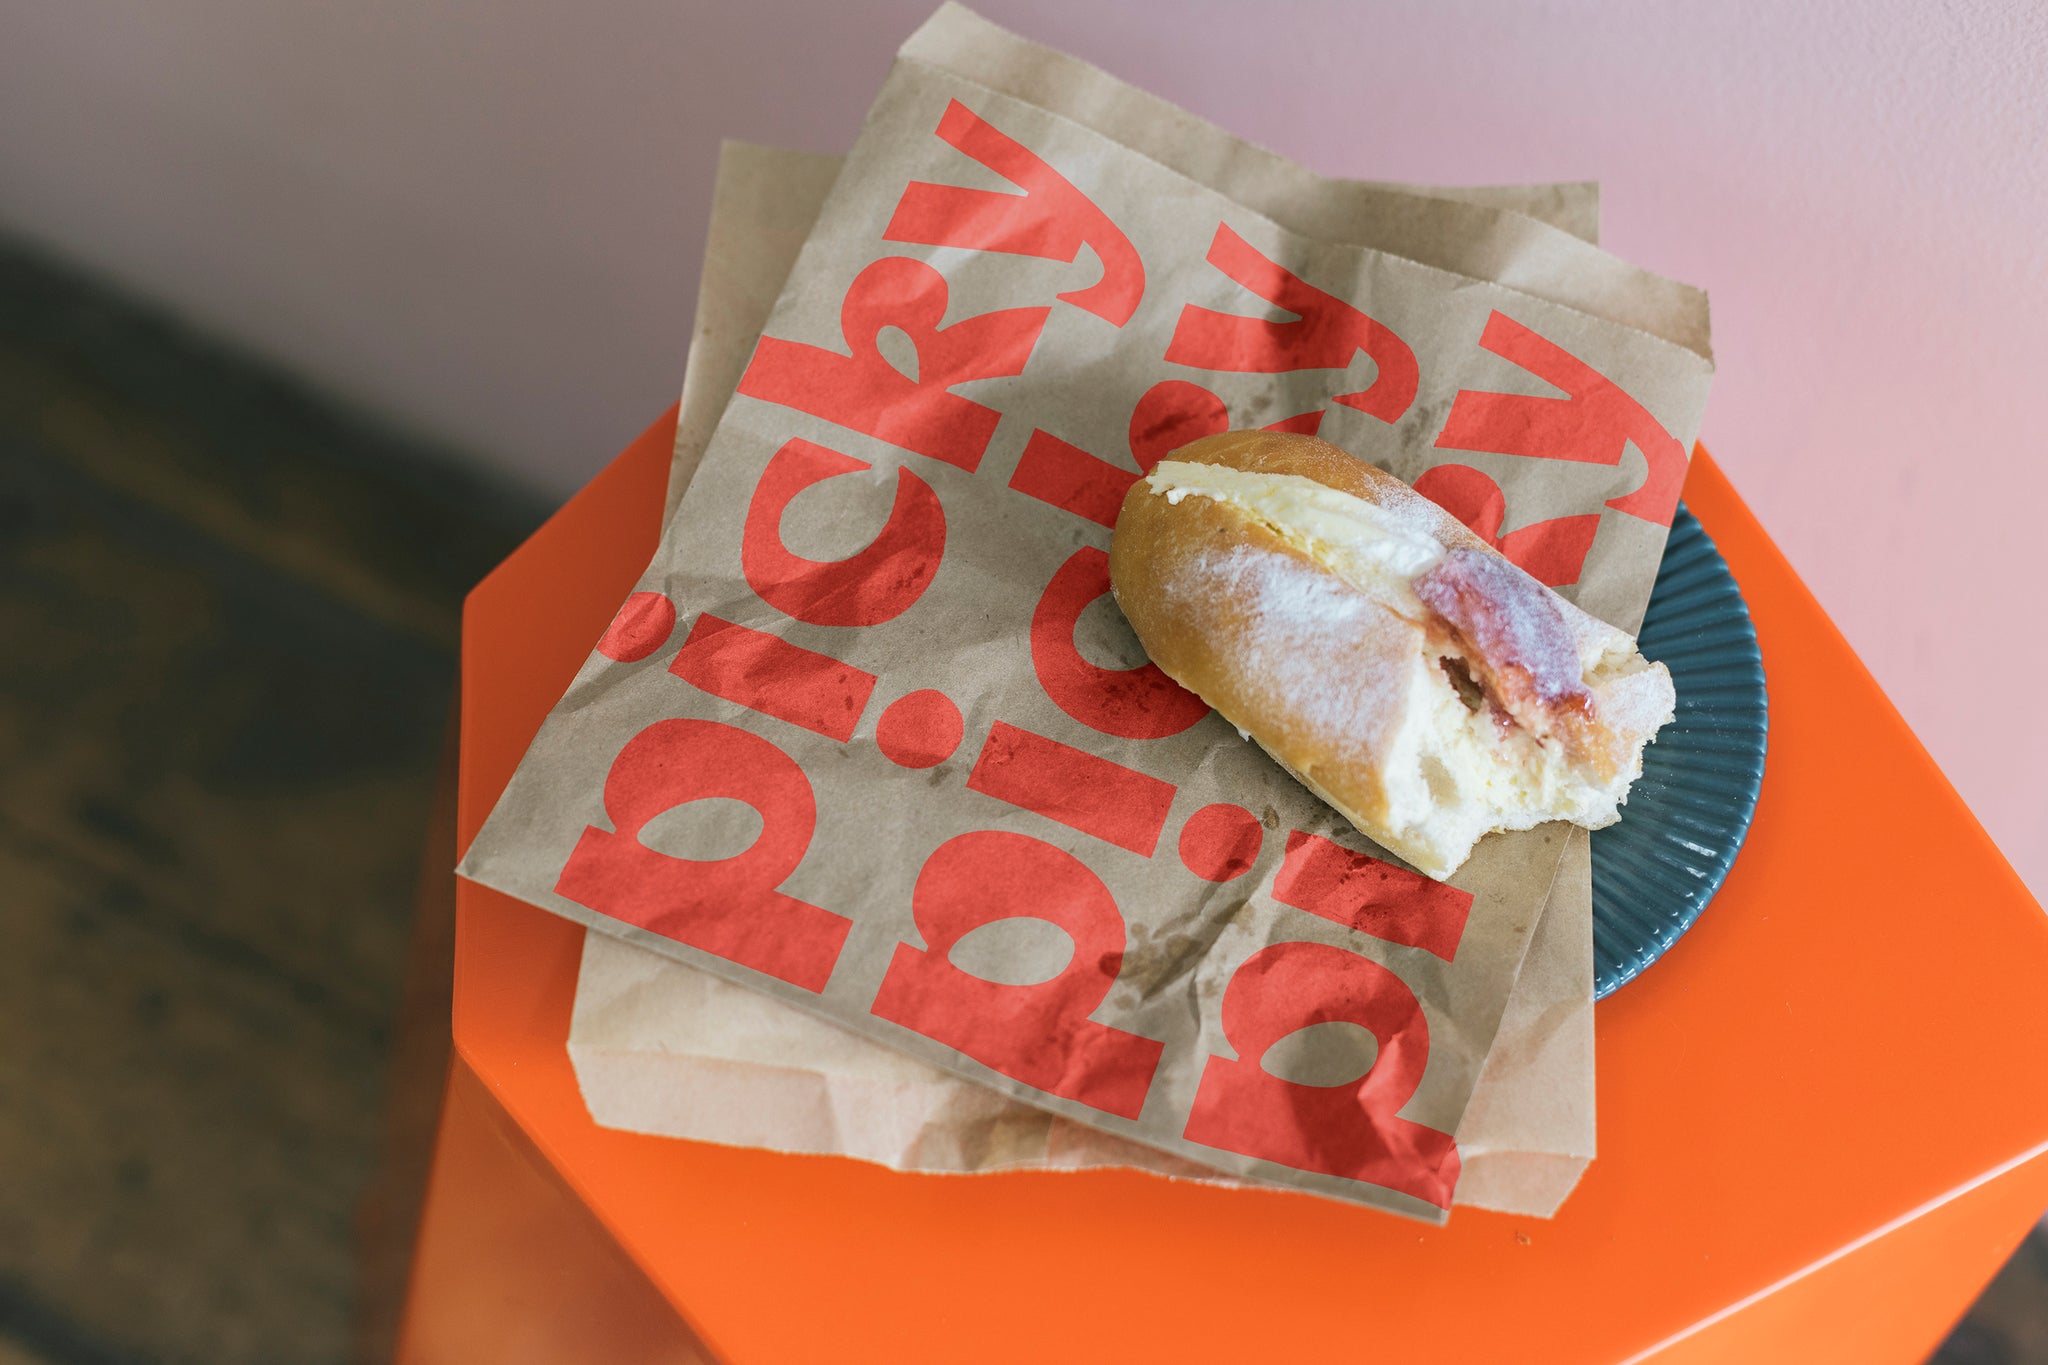 Brown paper bag placed on top of orange hexagon shaped stool. A Half eaten fresh cream donut with jam is place on top of bag. The words Picky is repeated three times in red on top of the bag. 